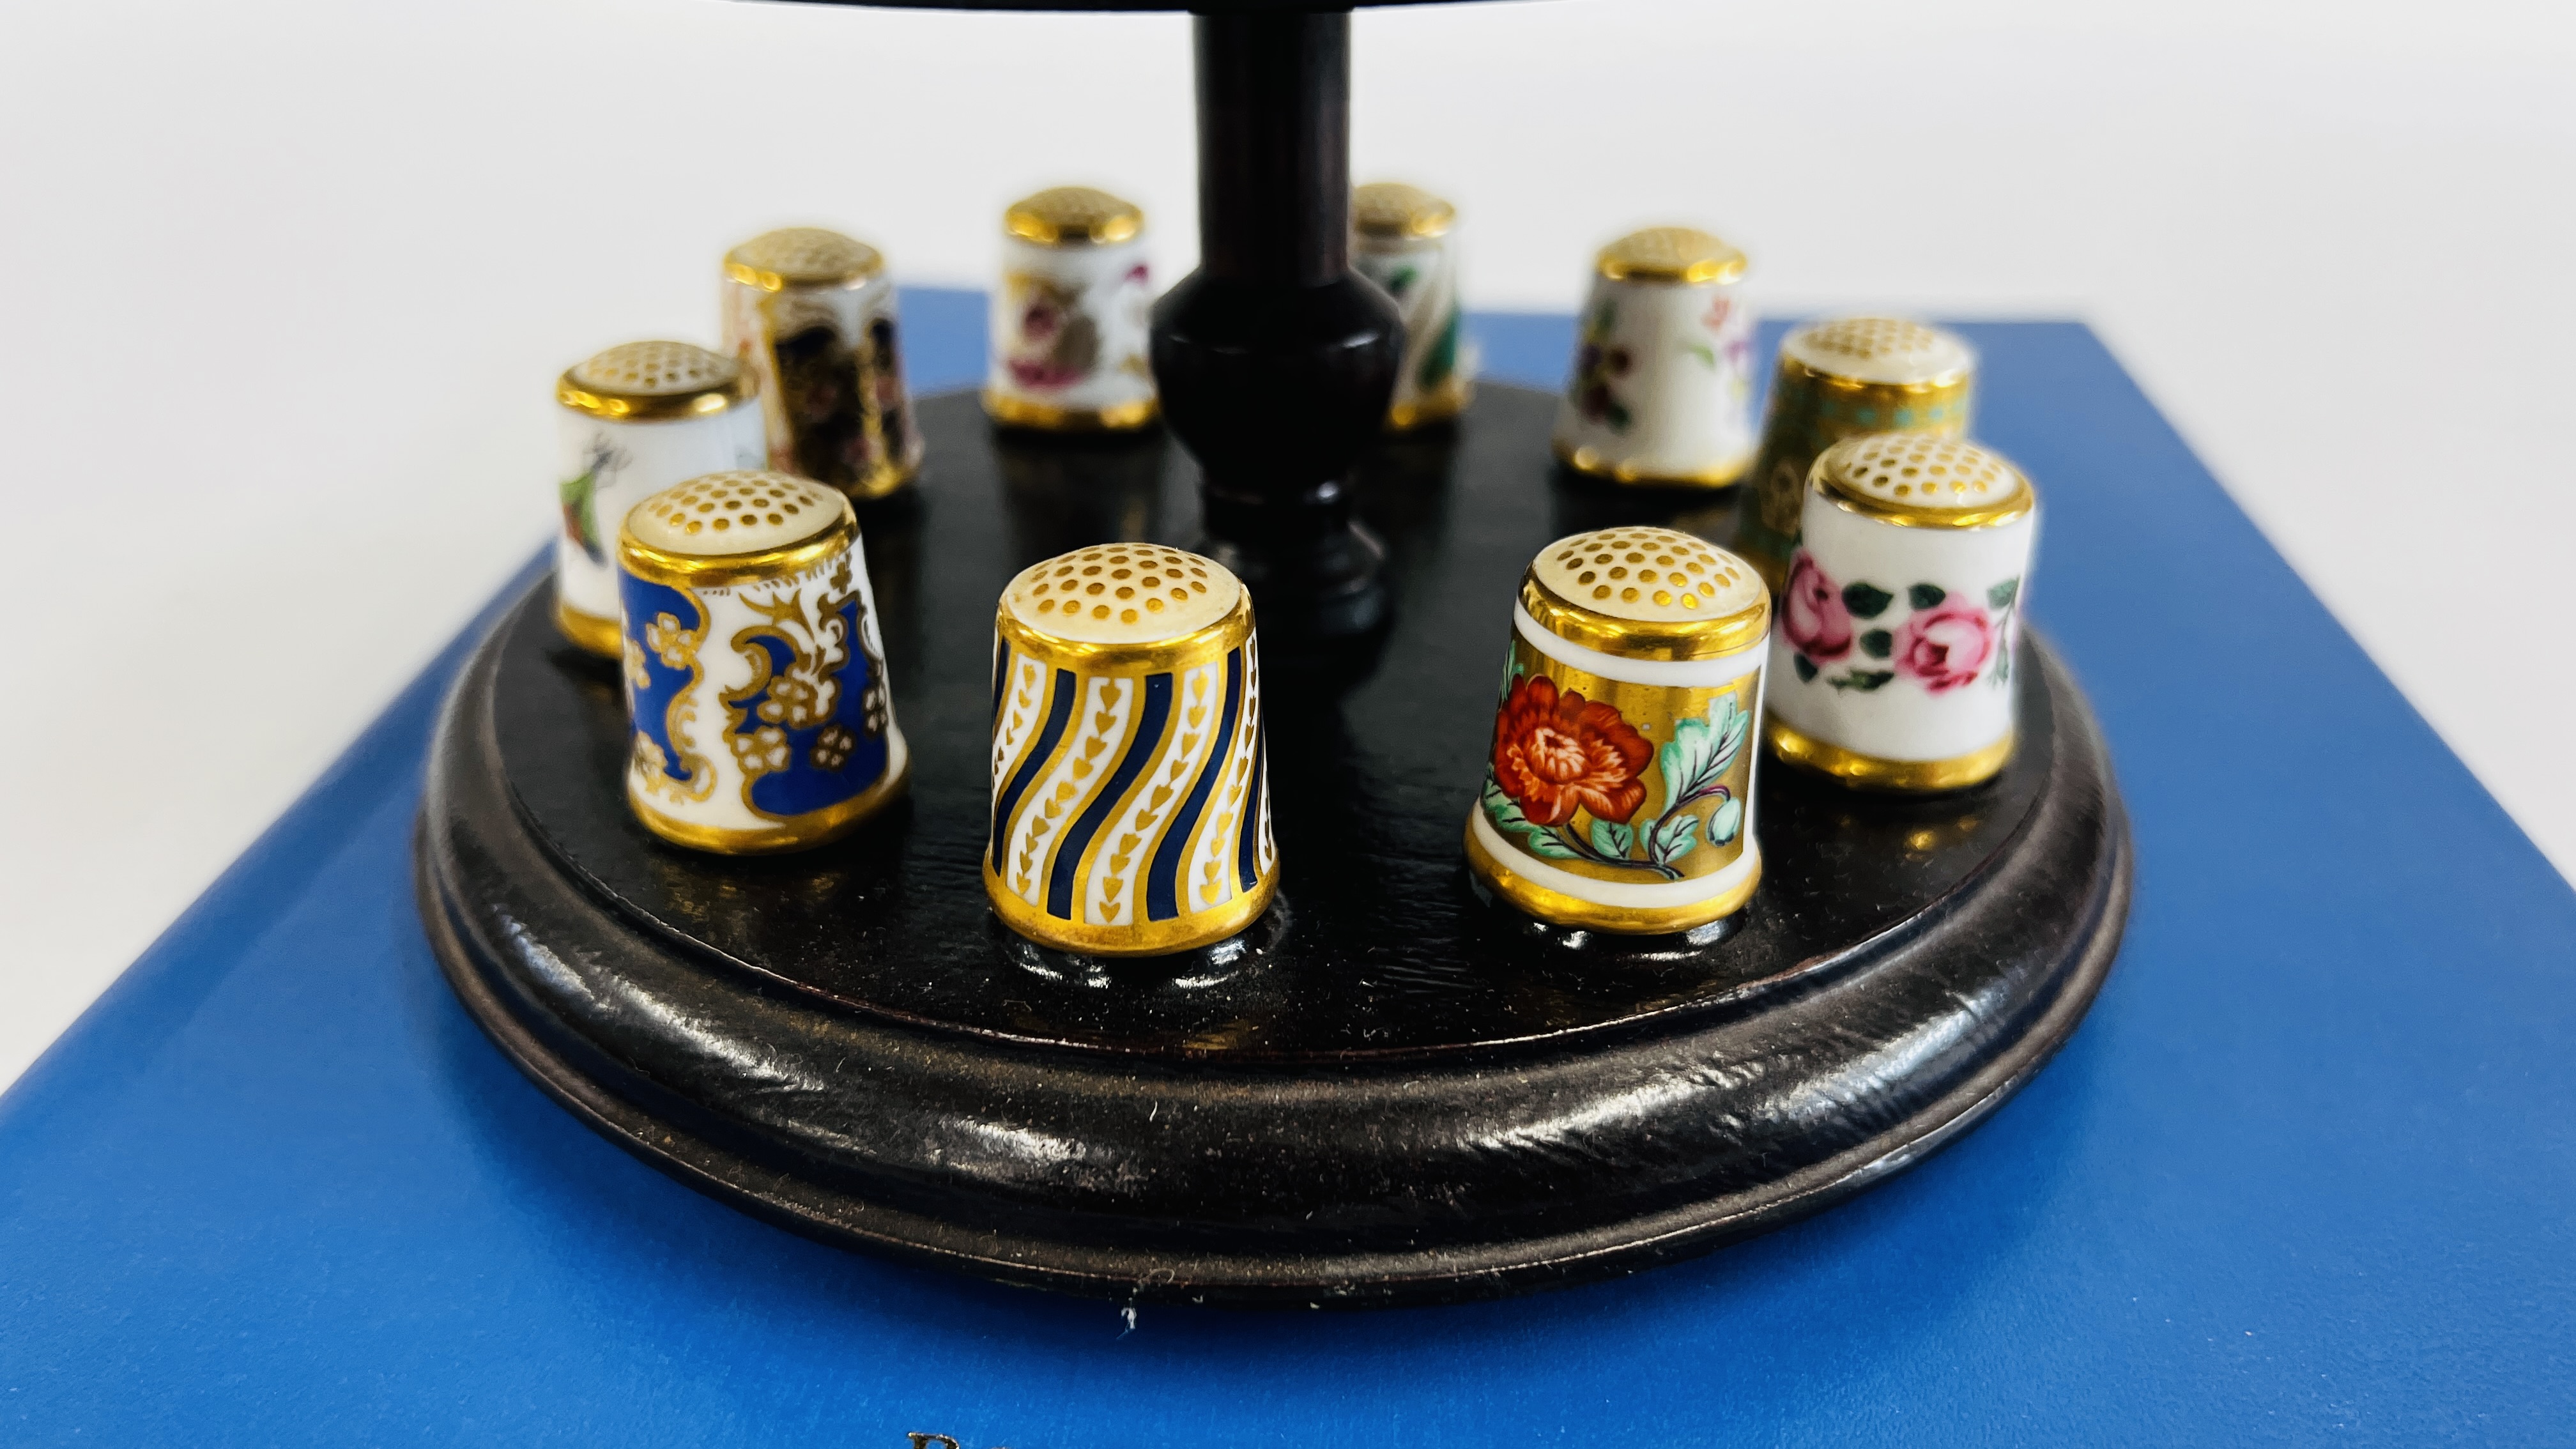 A COLLECTION OF 15 ROYAL CROWN DERBY THIMBLES ON A THIMBLE STAND WITH A PIN CUSHION INSET ALONG - Image 6 of 9